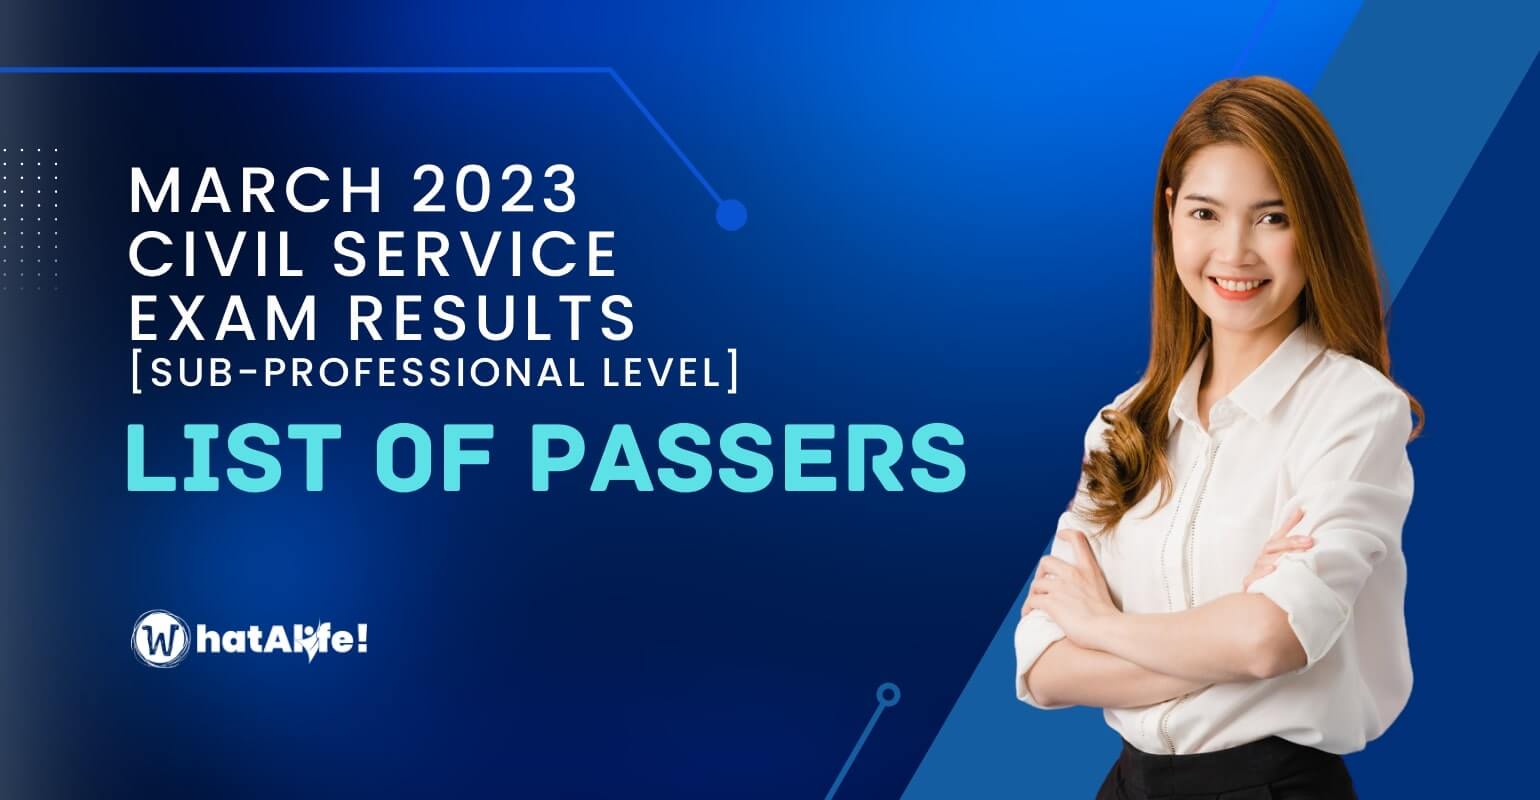 List of Passers March 2023 Civil Service Exam Results – Sub-Professional Level